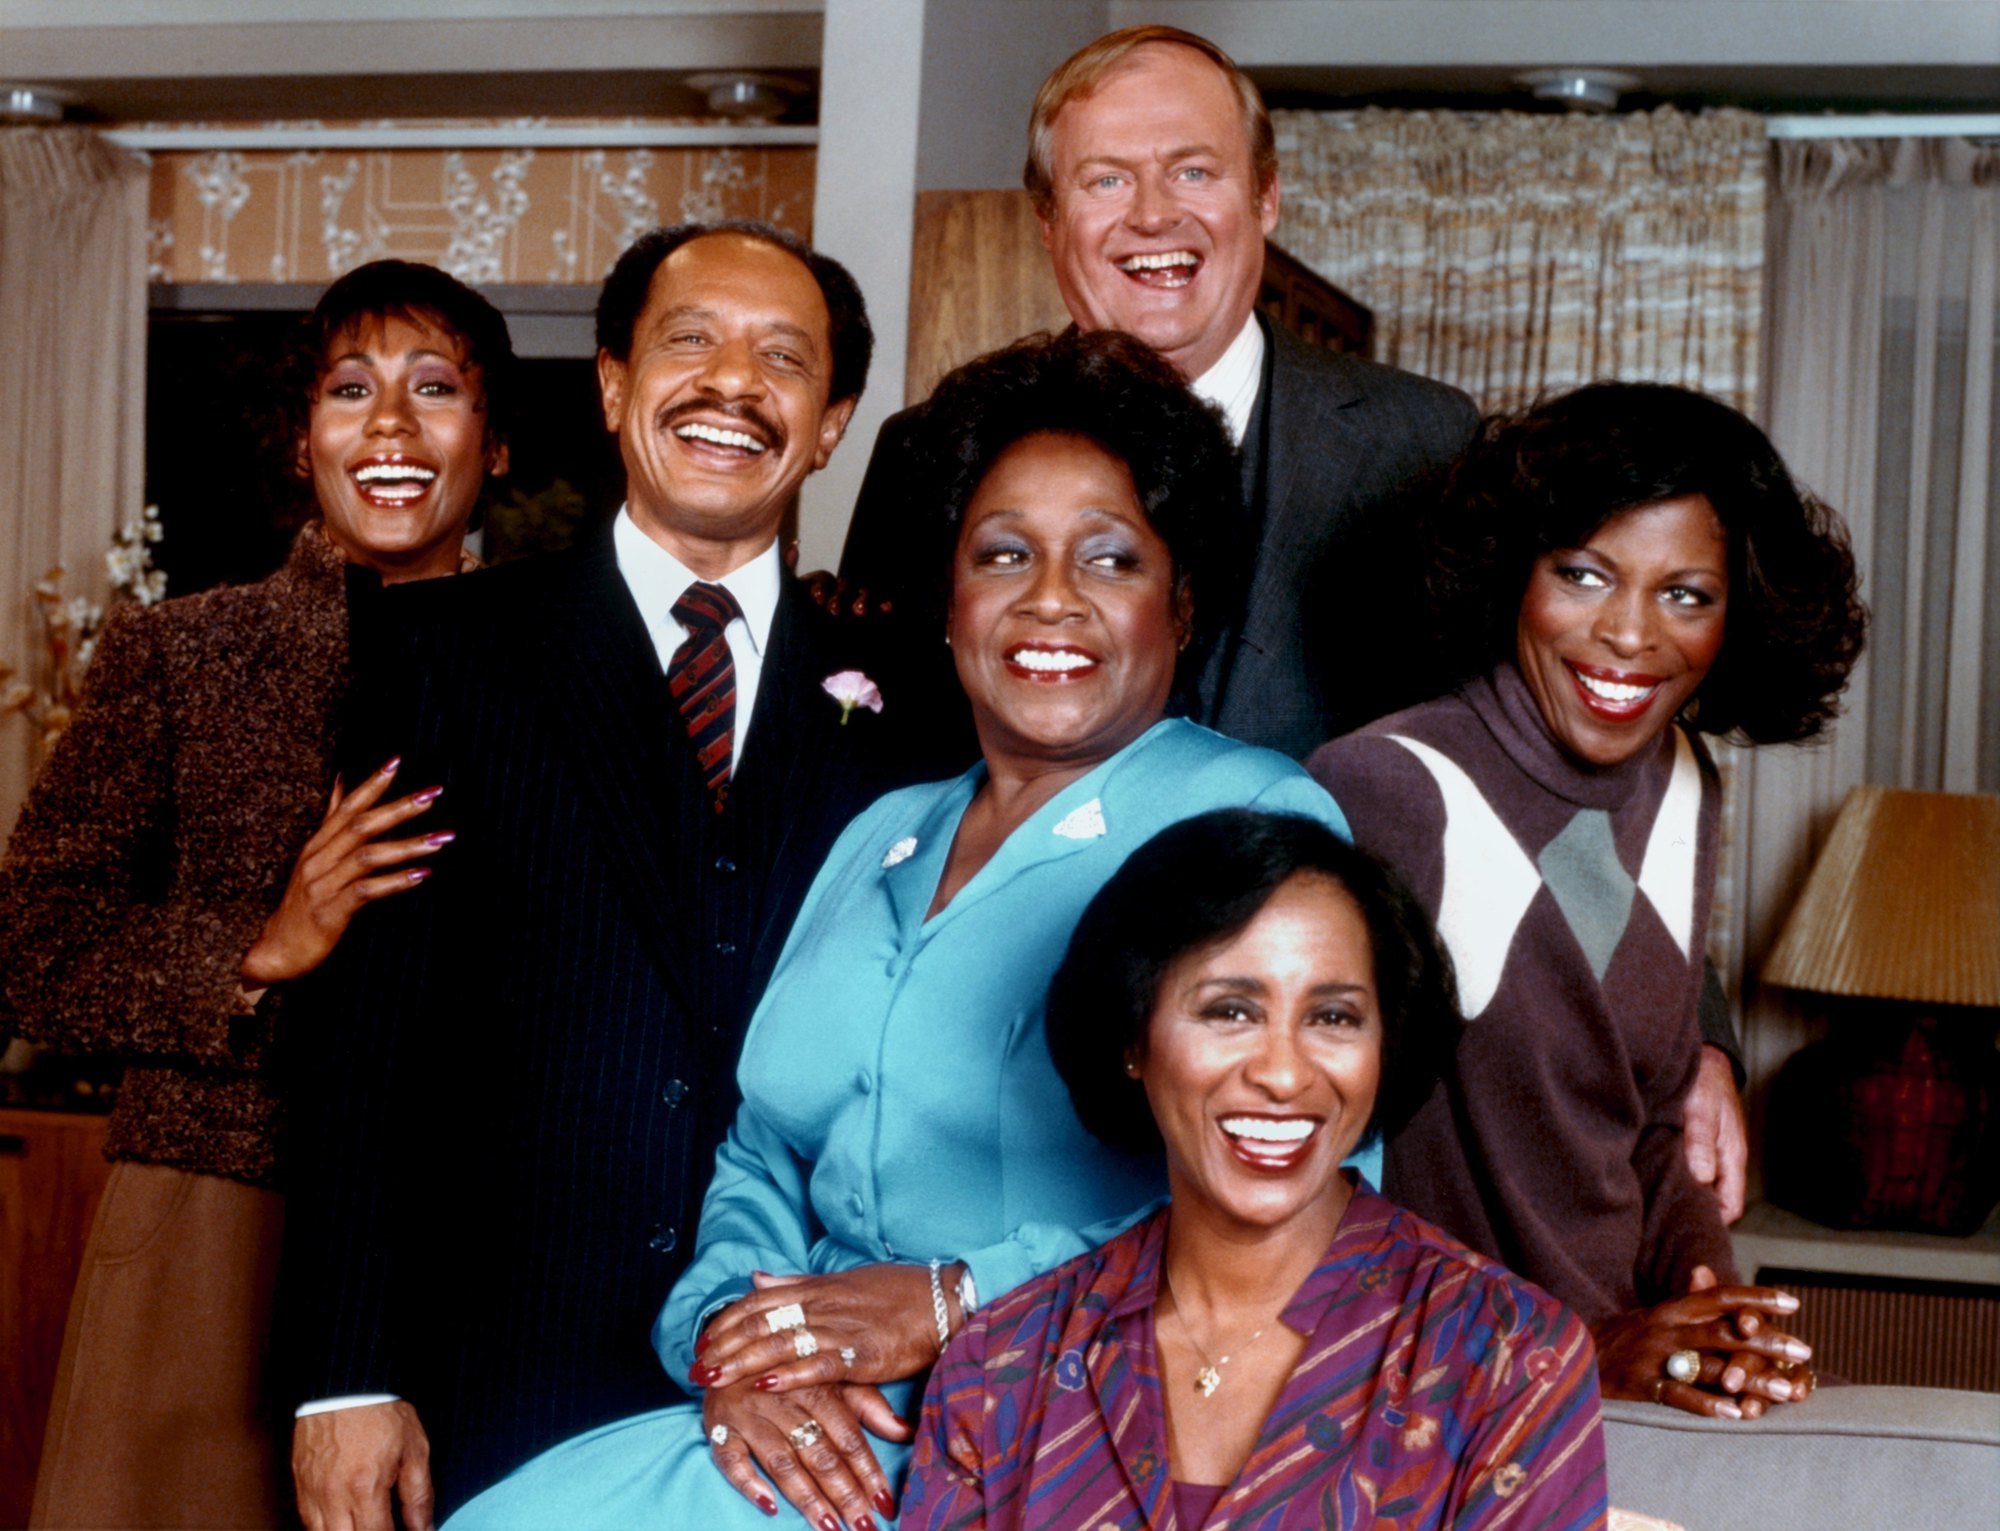 (L-R) Berlinda Tolbert, Sherman Hemsley, Isabel Sanford, Franklin Cover, Roxie Roker, and Marla Gibbs (seated) smiling and laughing